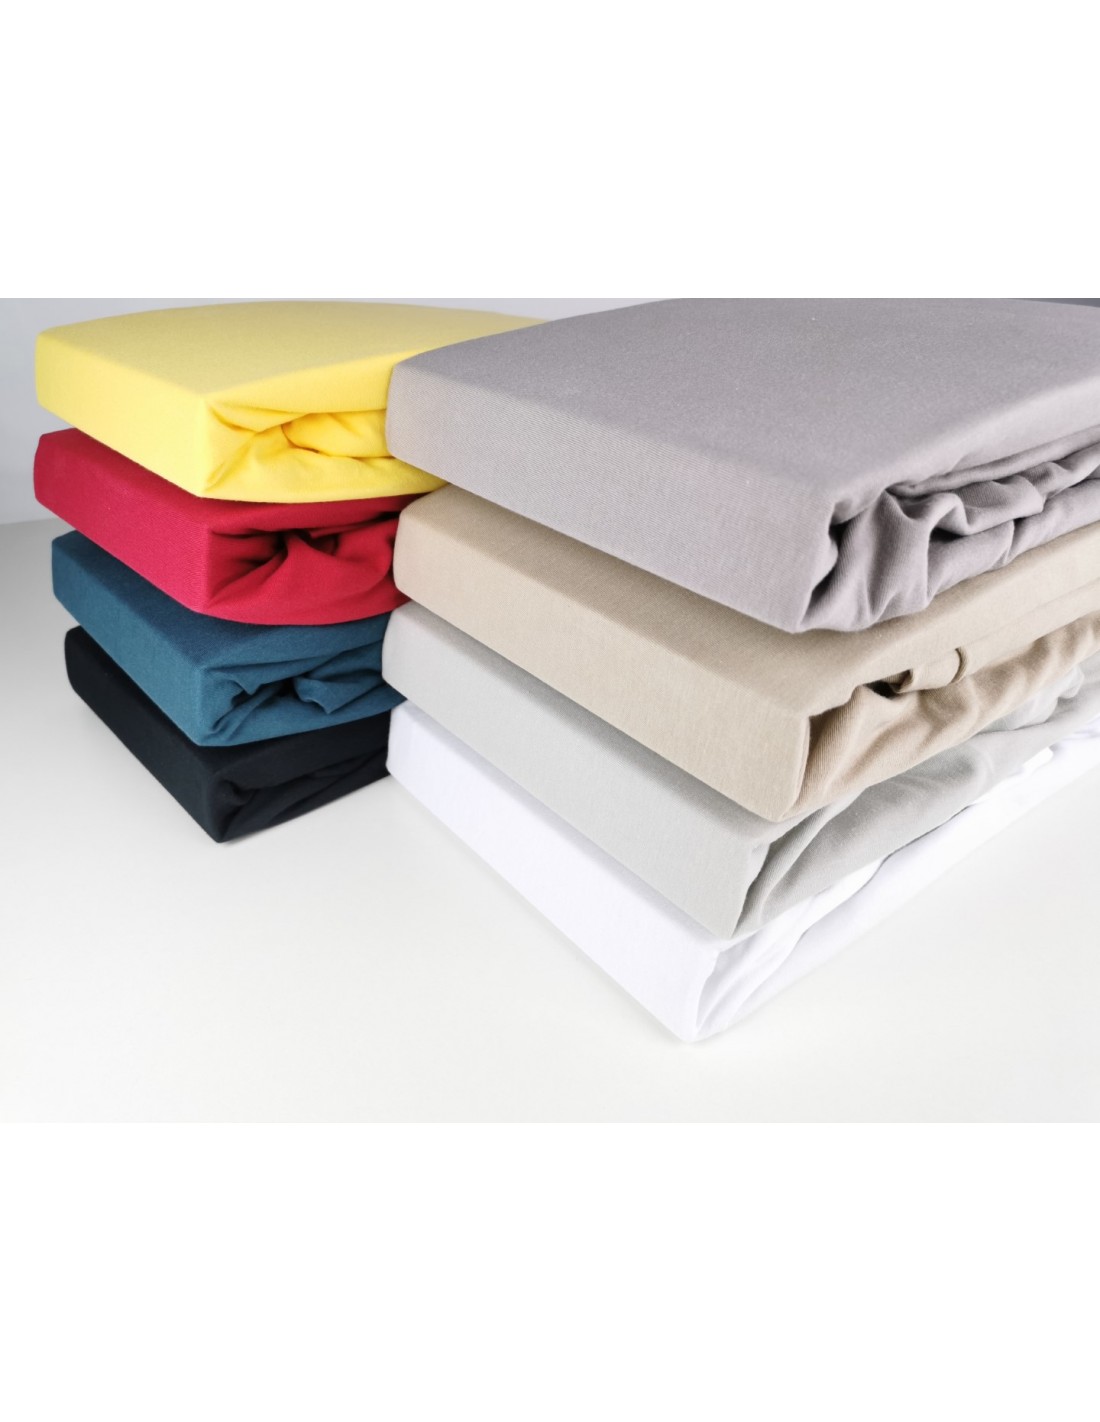 Fitted sheet manufacturer in Turkey